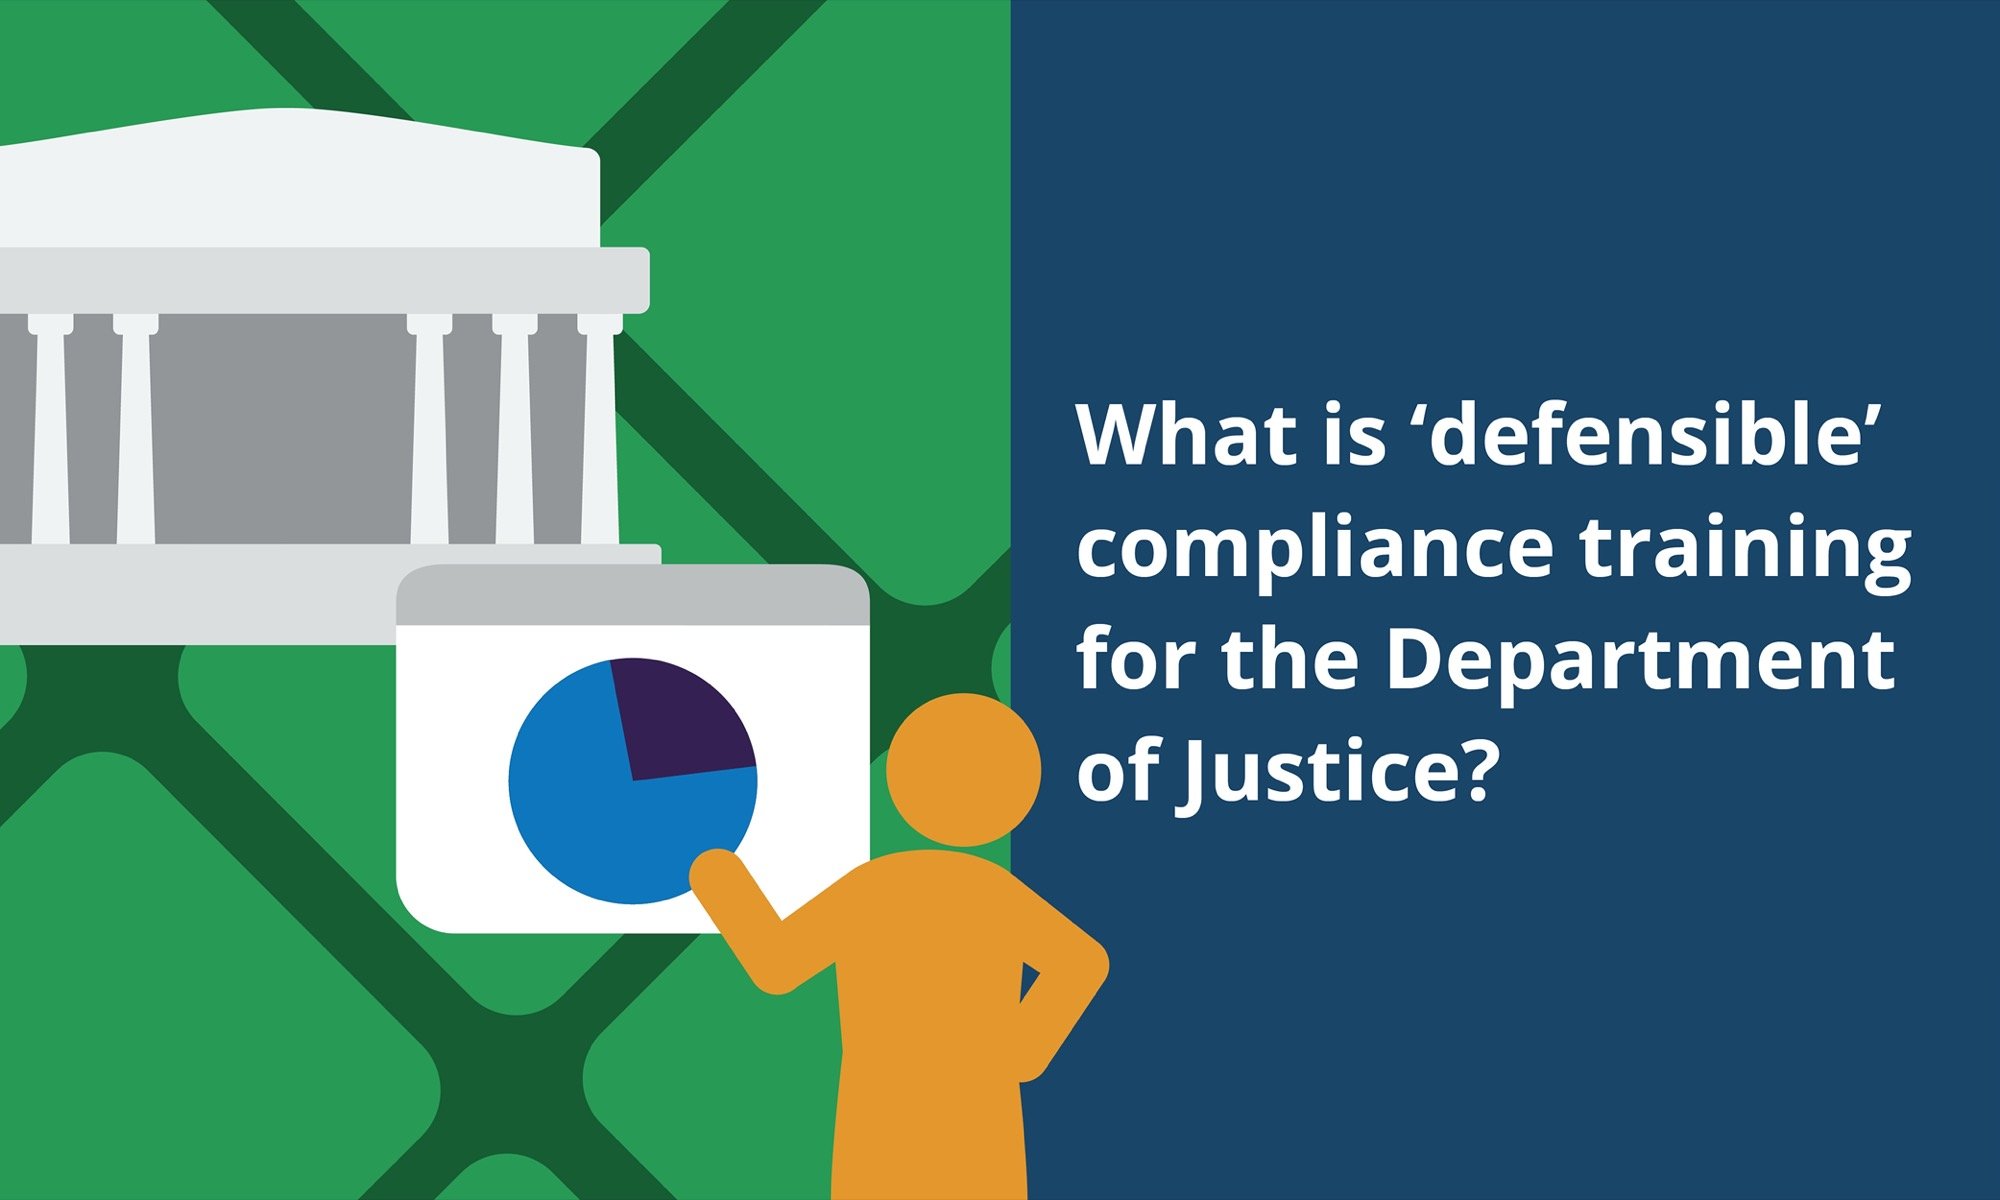 What is 'defensible' compliance training for the Department of Justice?